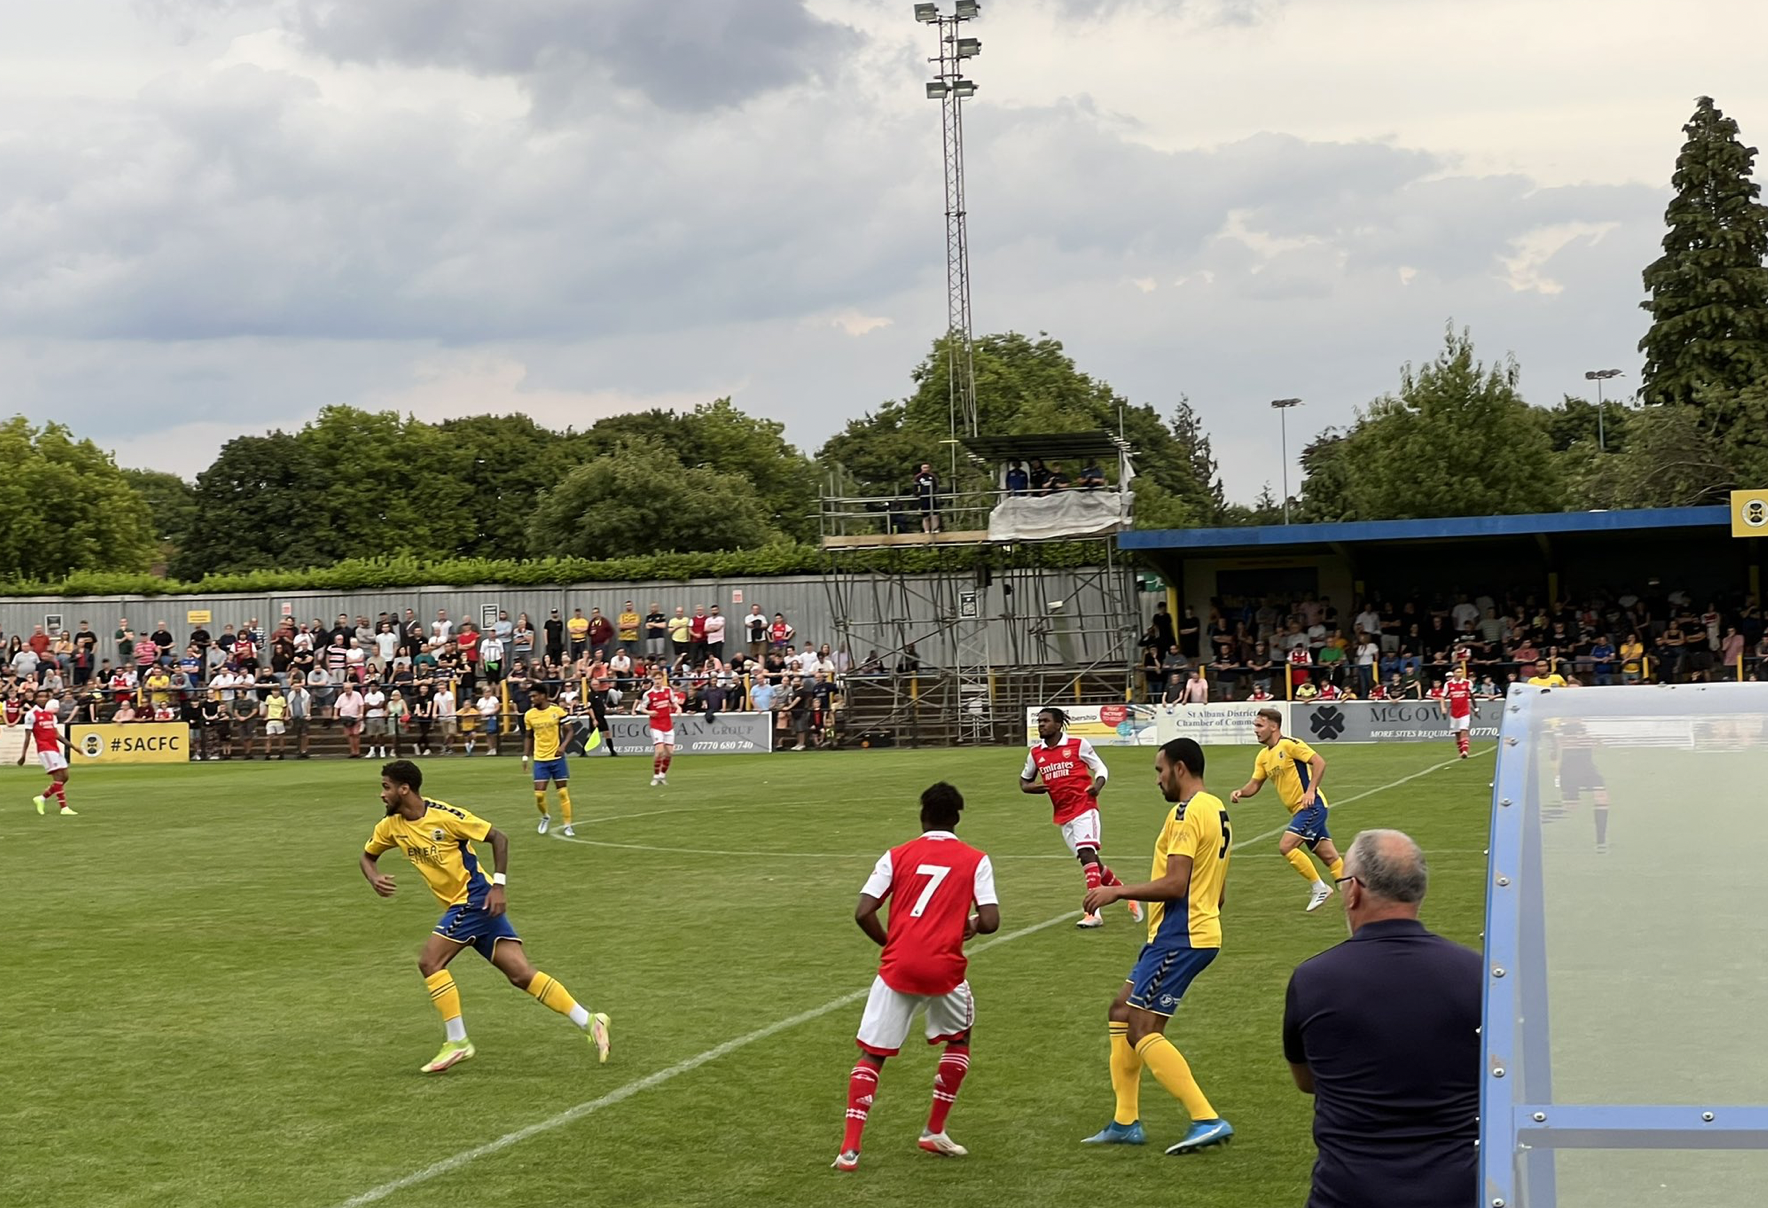 Player Ratings: St Albans 0-1 Arsenal XI - Joel Ideho seals hard-fought win with spectacular long-range strike